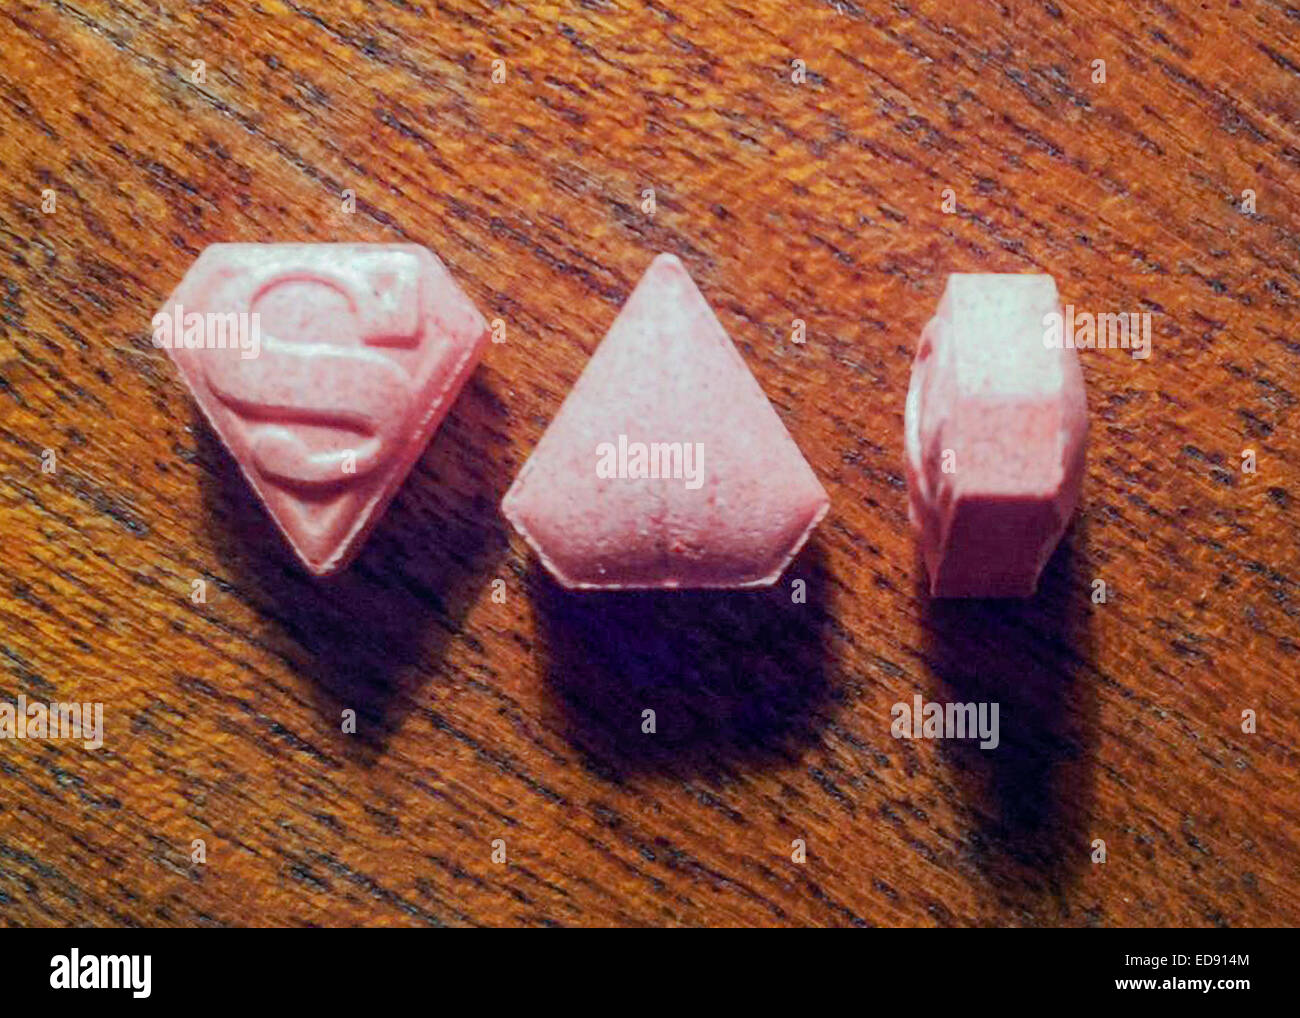 Fake Ecstasy pills know as 'Pink Superman' containing PMMA responsible for at least 4 deaths. See description for more information. Stock Photo